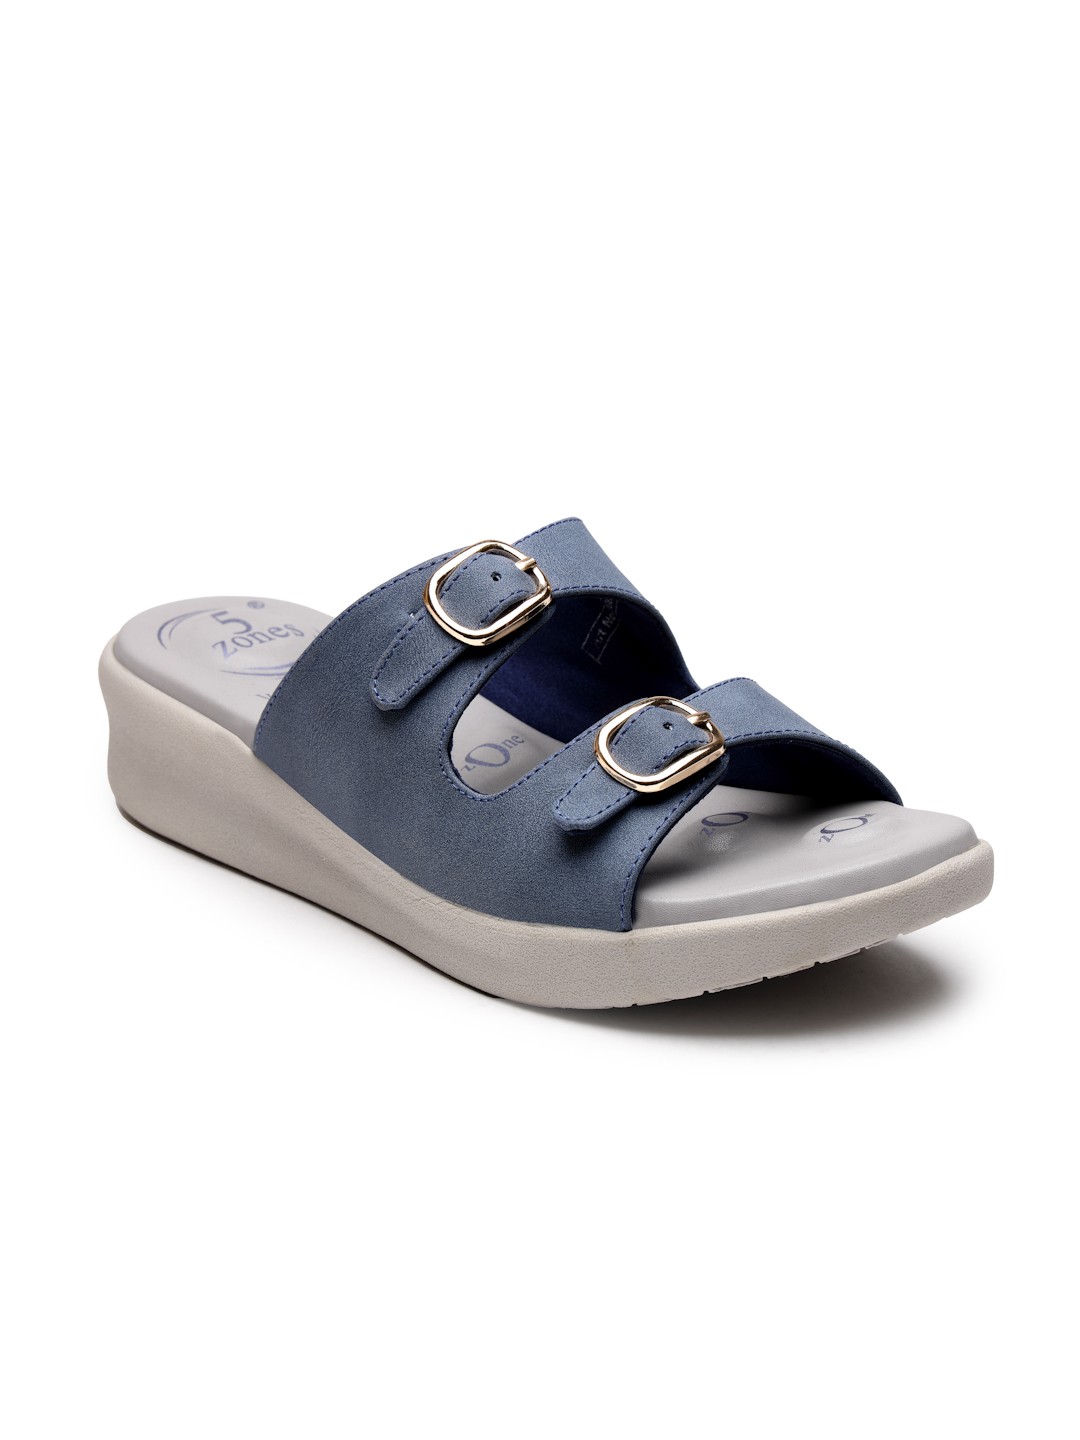 VON WELLX GERMANY comfort women's blue casual slippers FLORENCE